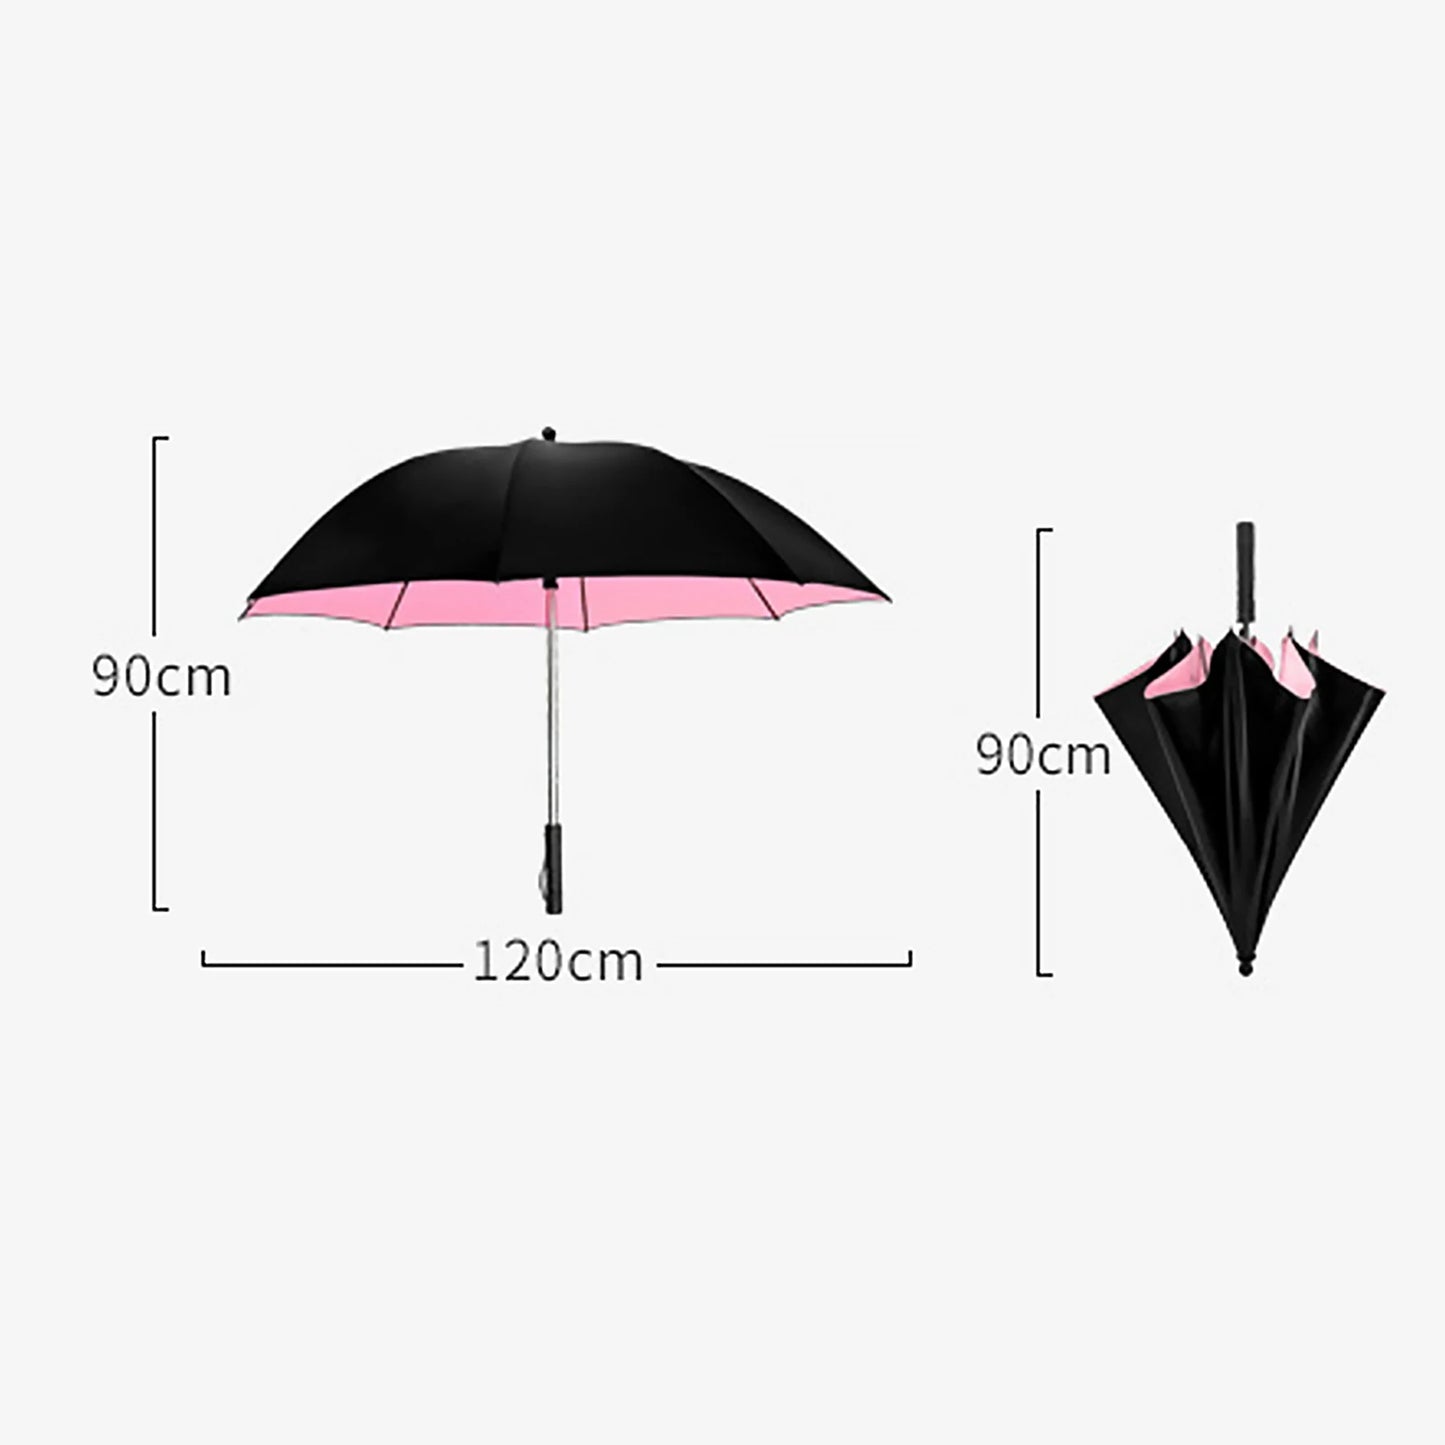 Portable Umbrella with Fan, UV Sun Umbrella, Safety Isolation Mesh, Super Wind Power, USB Rechargeable